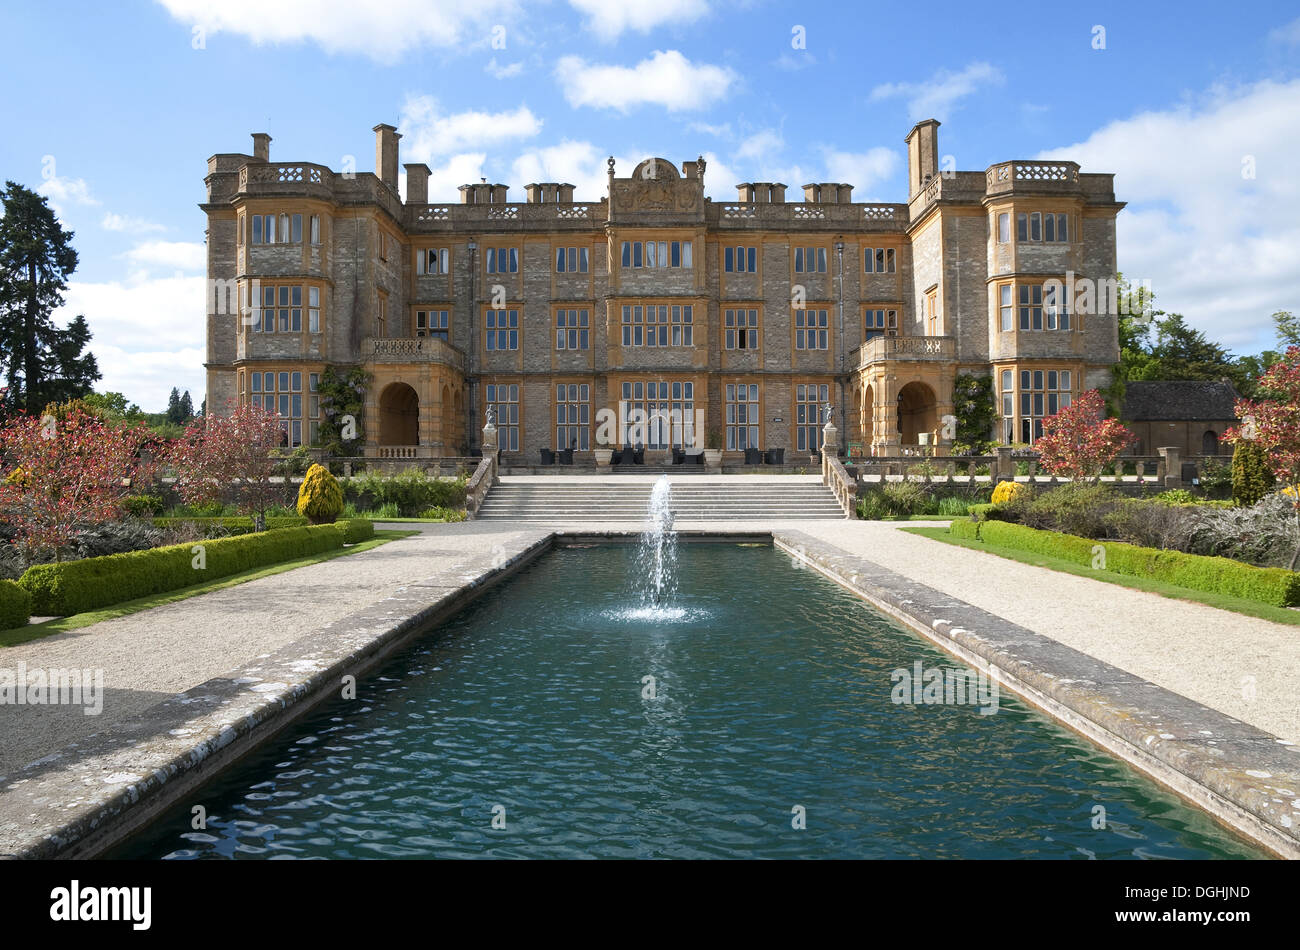 Jacobean-style mansion with garden and water feature, Eynsham Hall, Oxfordshire, England, June Stock Photo